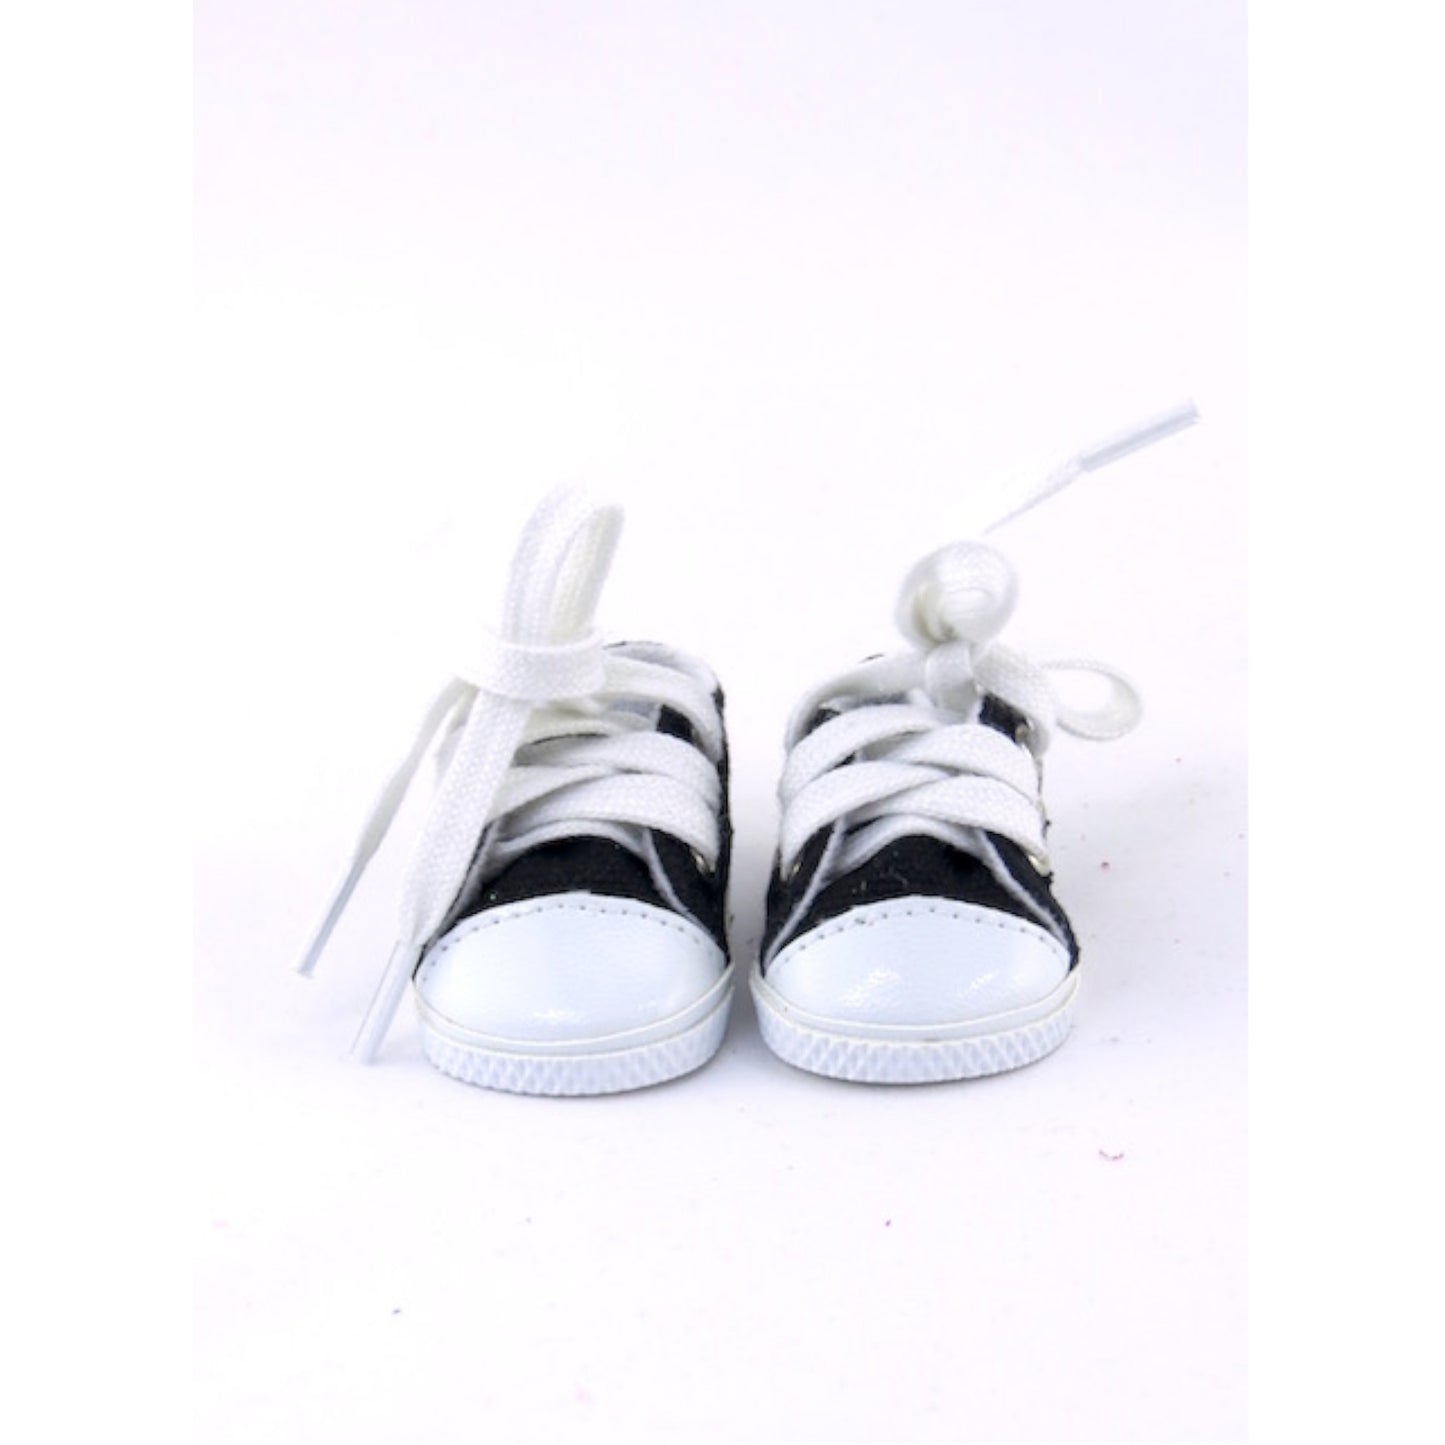 Black Low Cut Sneakers for 14.5 inch Dolls